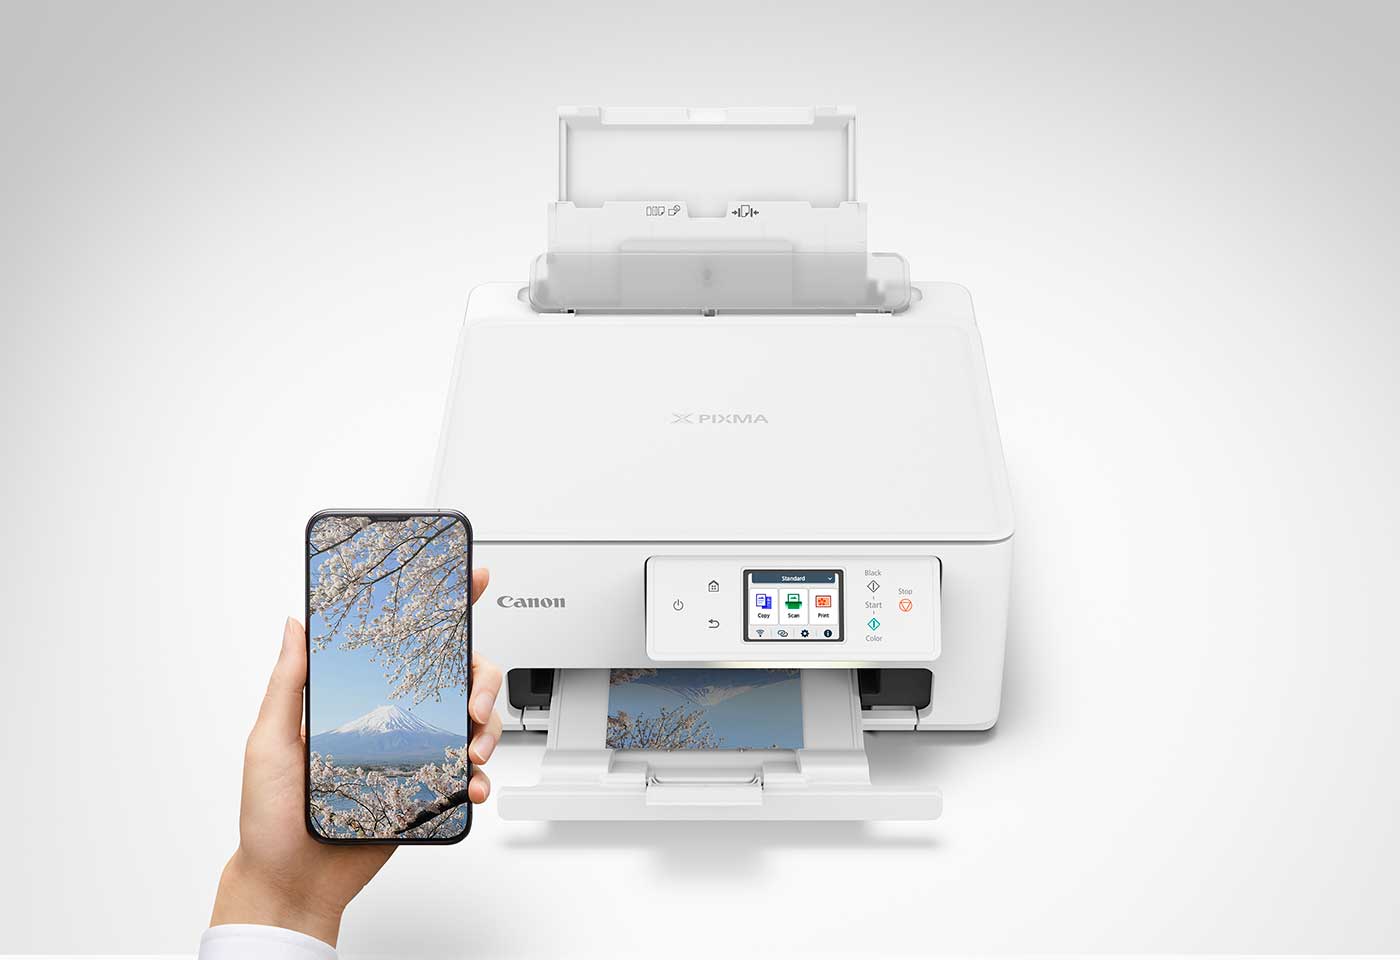 Image of PIXMA TS7760 HOME printer connected to mobile